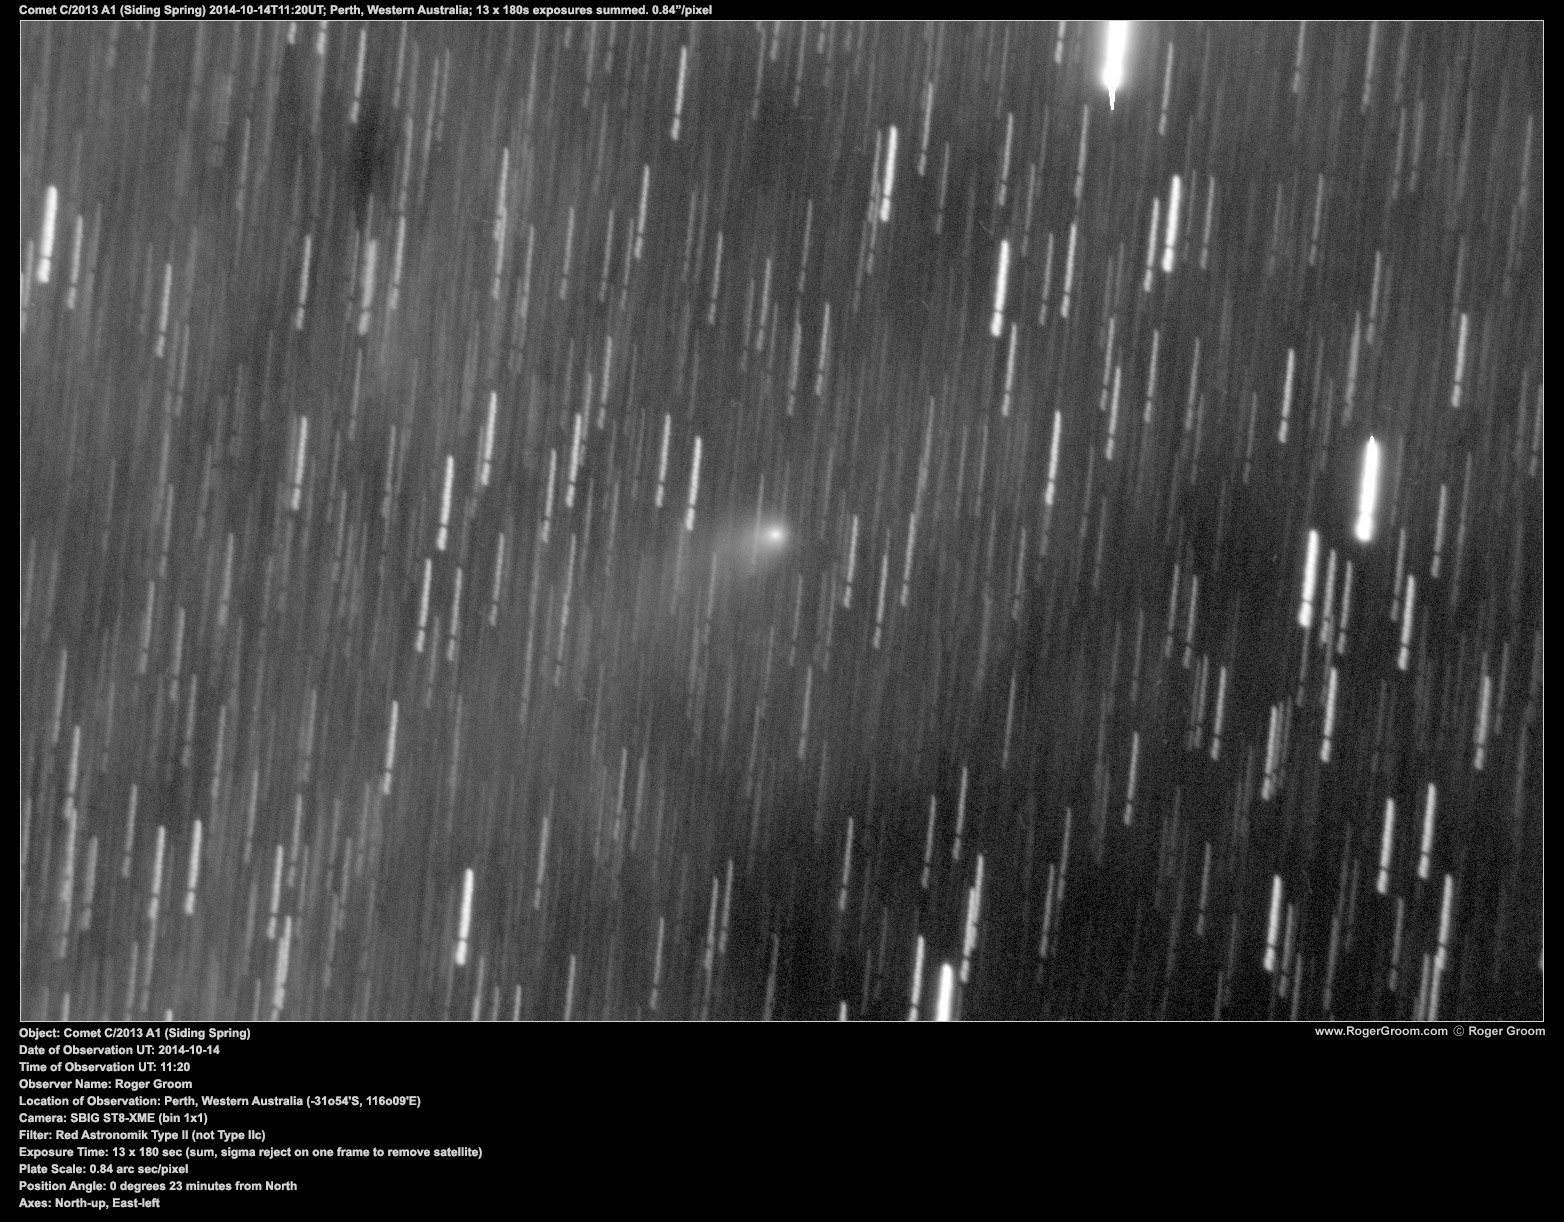 Object: Comet C/2013 A1 (Siding Spring) Date of Observation UT: 2014-10-14 Time of Observation UT: 11:20 Observer Name: Roger Groom Location of Observation: Perth, Western Australia (-31o54'S, 116o09'E) Camera: SBIG ST8-XME (bin 1x1) Filter: Red Astronomik Type II (not Type IIc) Exposure Time: 13 x 180 sec (sum, sigma reject on one frame to remove satellite) Plate Scale: 0.84 arc sec/pixel Position Angle: 0 degrees 23 minutes from North Axes: North-up, East-left